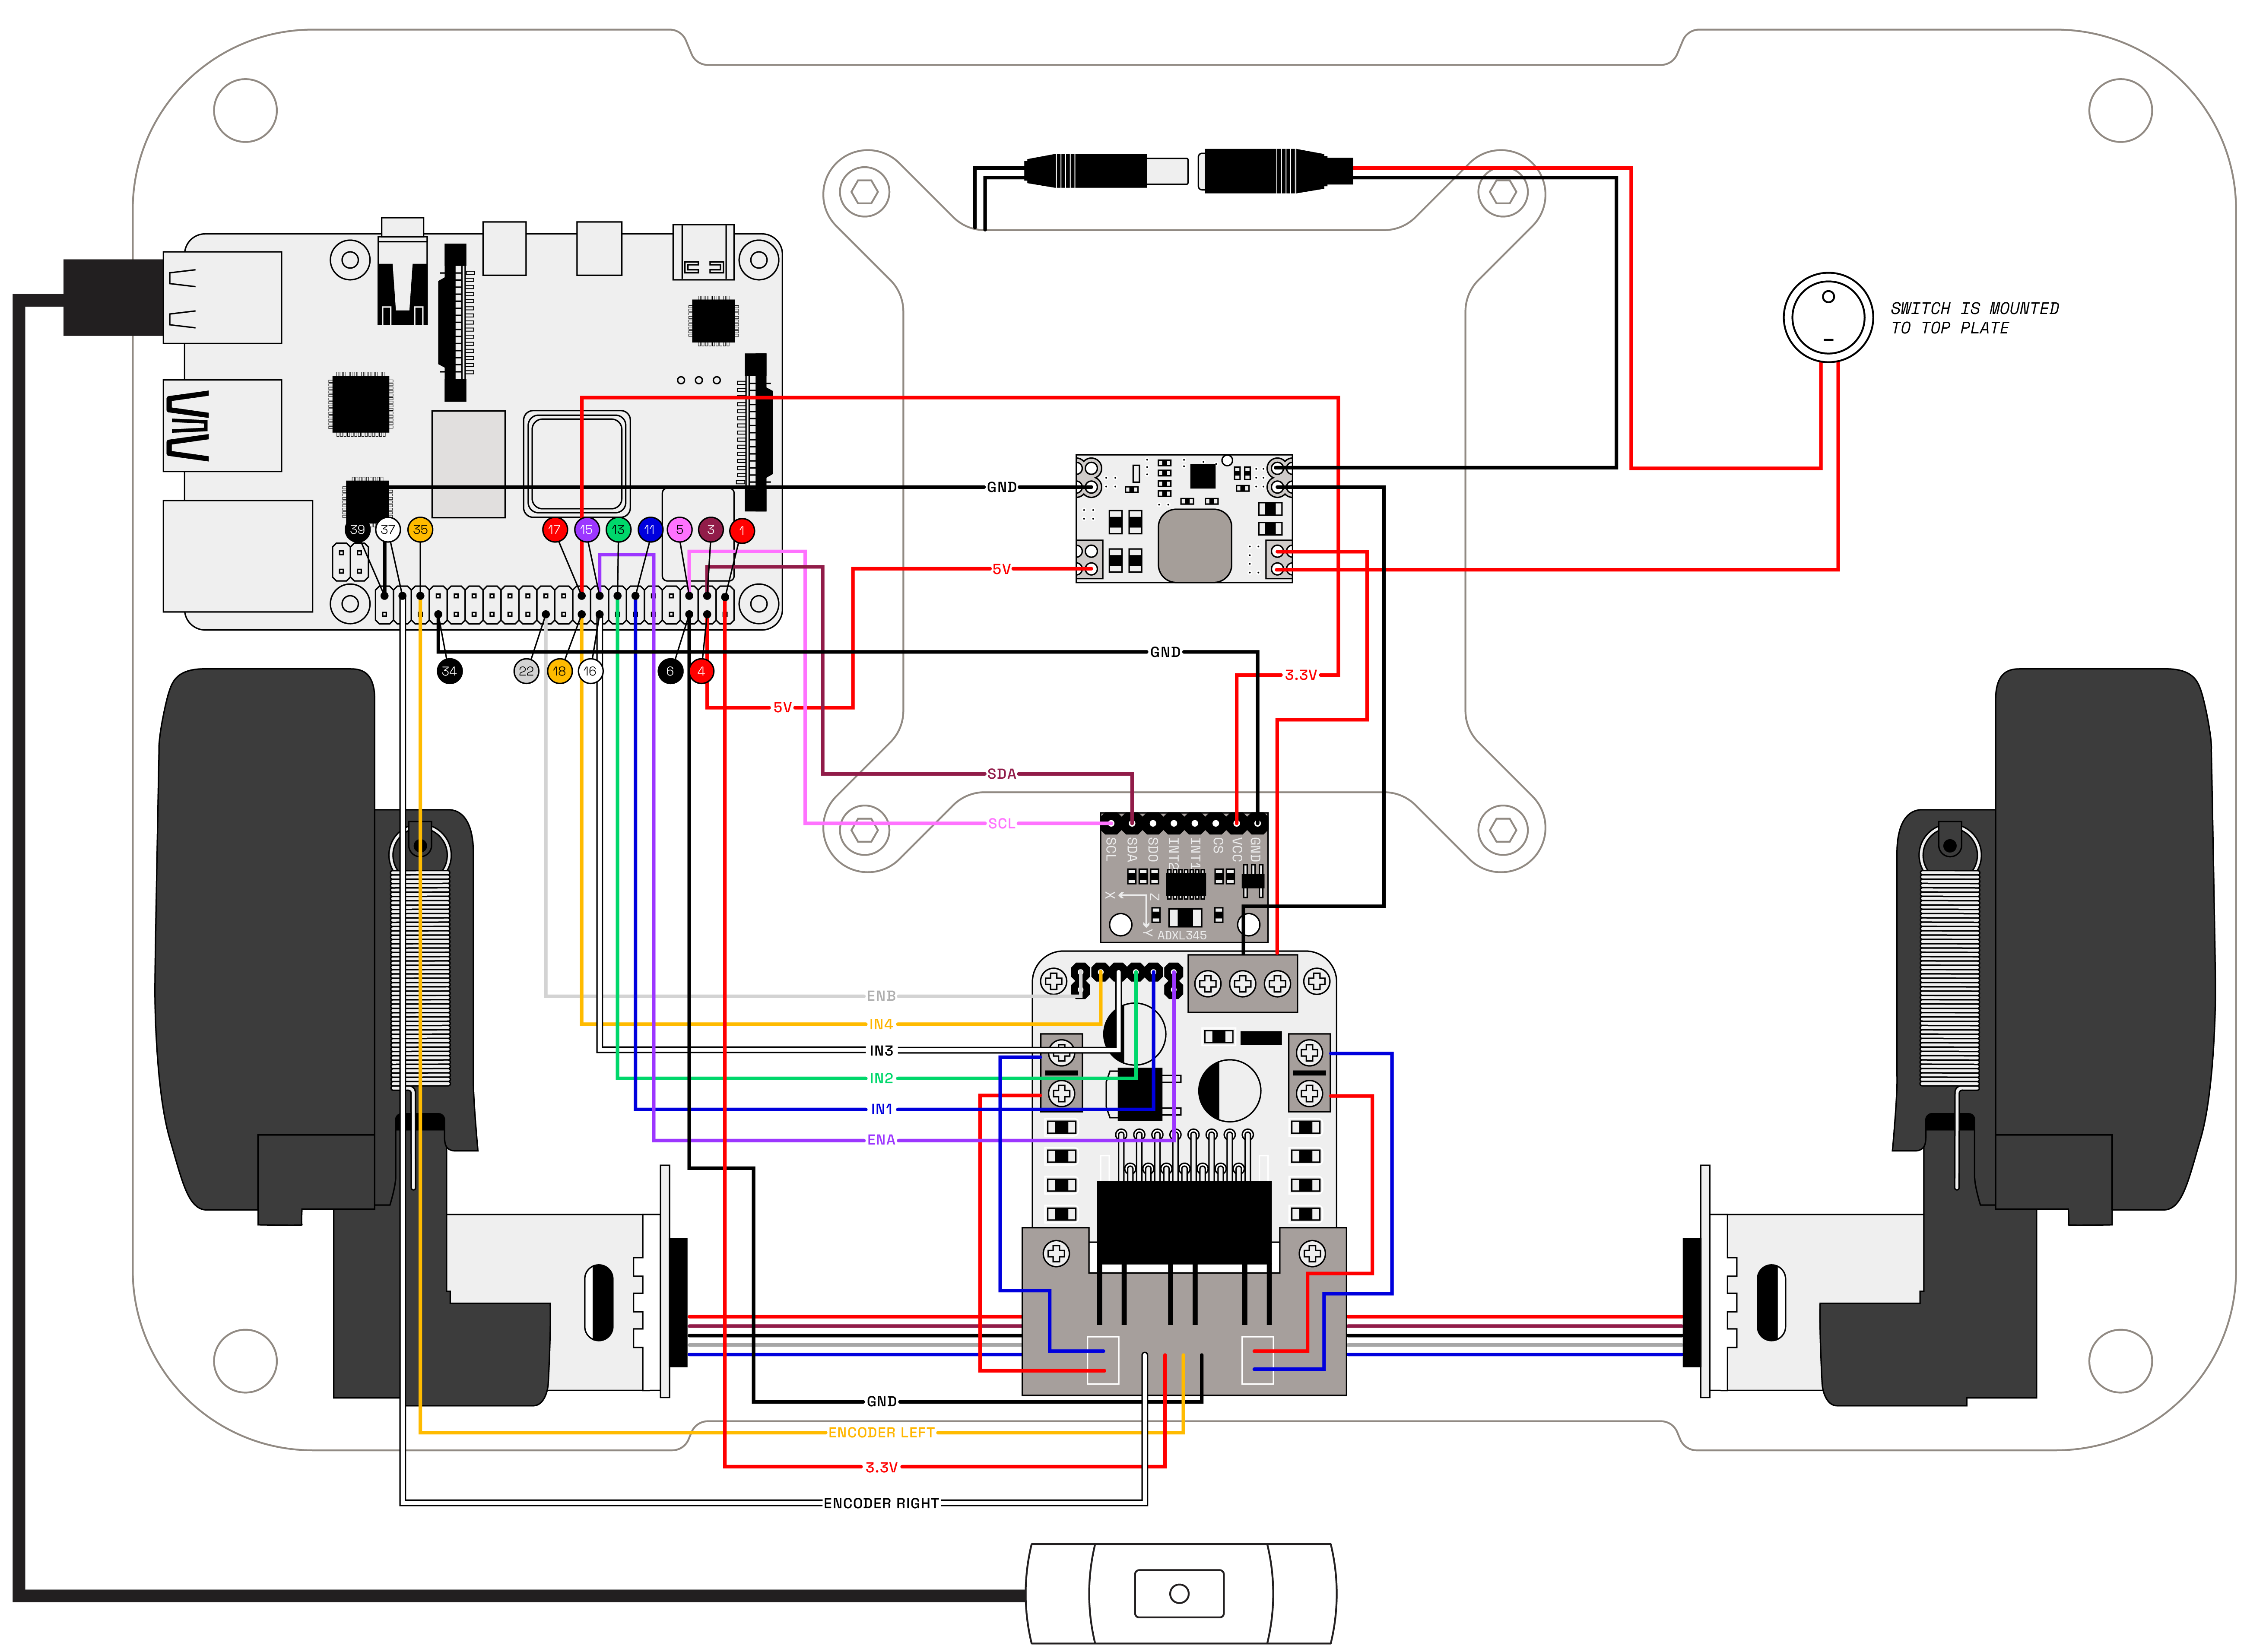 Wiring diagram showcasing the Pi, motors, driver, camera, and all other rover components.